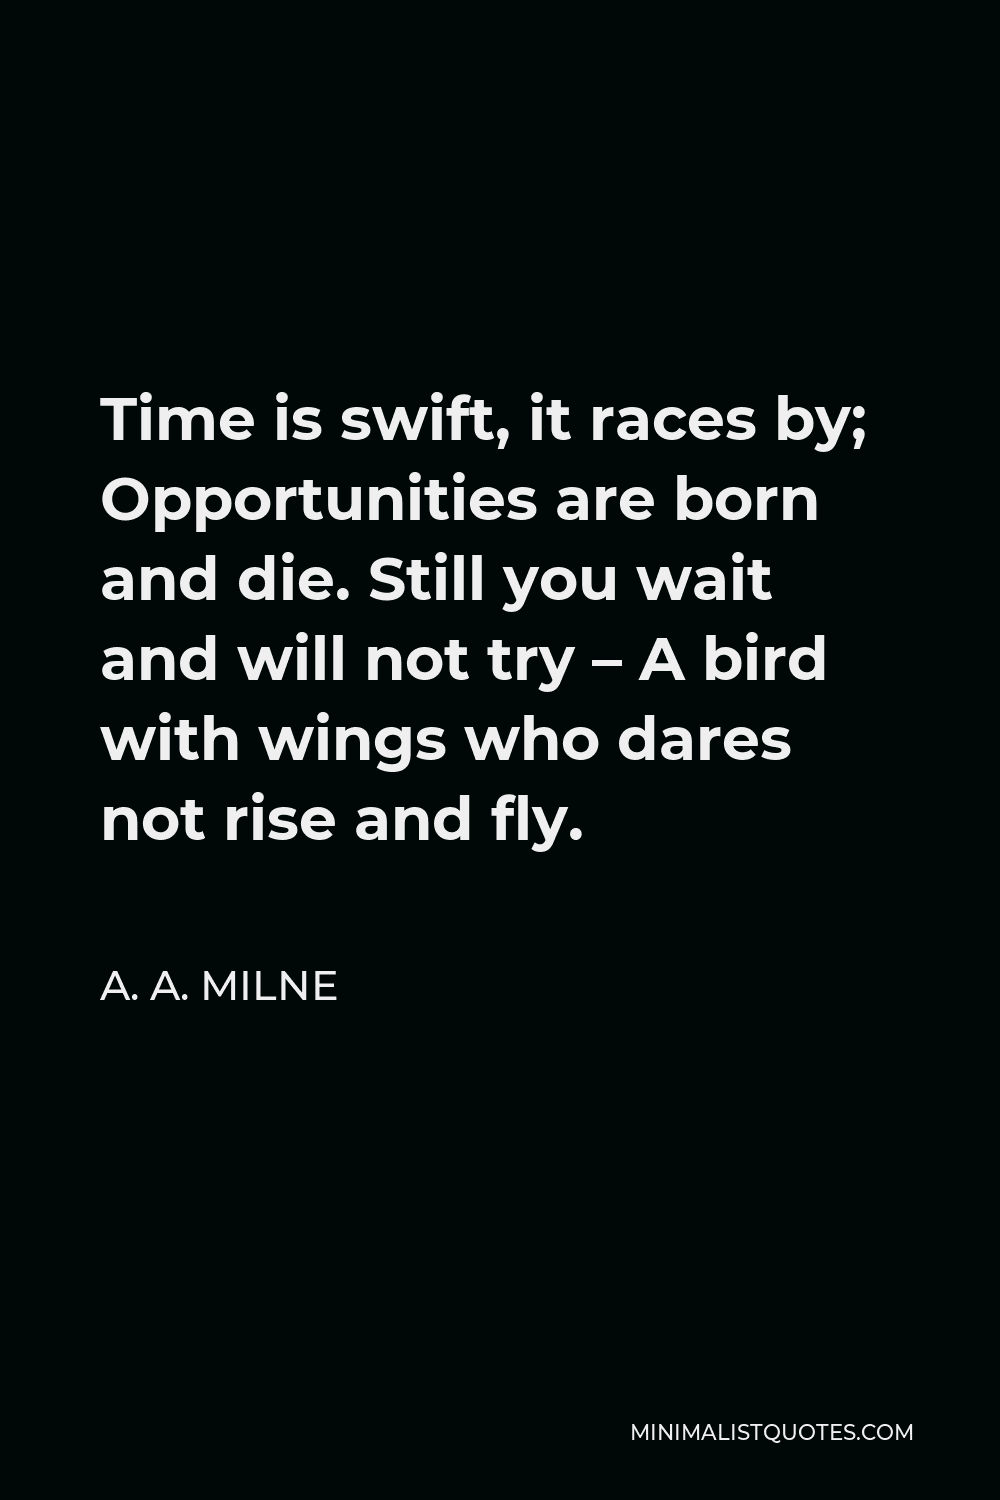 A. A. Milne Quote - Time is swift, it races by; Opportunities are born and die. Still you wait and will not try – A bird with wings who dares not rise and fly.